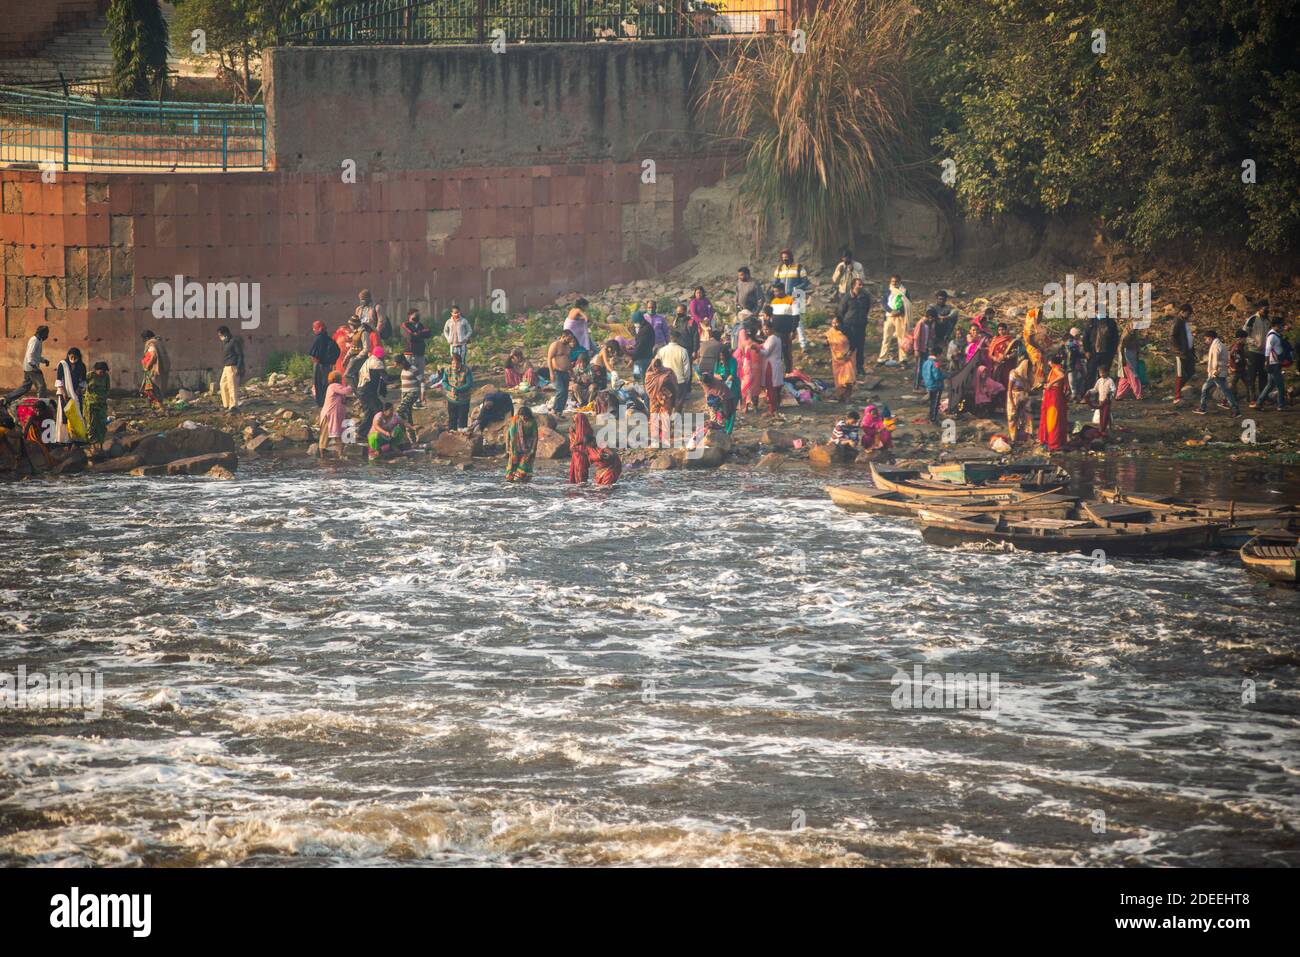 Delhi, India. 30th Nov, 2020. Devotees taking a holy dip in the highly polluted Yamuna River in Delhi. Devotees went for a traditional bath to mark the Karthik Purnima religious ceremony celebrated on the full moon day of the Hindu calendar month of Karthik. Credit: SOPA Images Limited/Alamy Live News Stock Photo